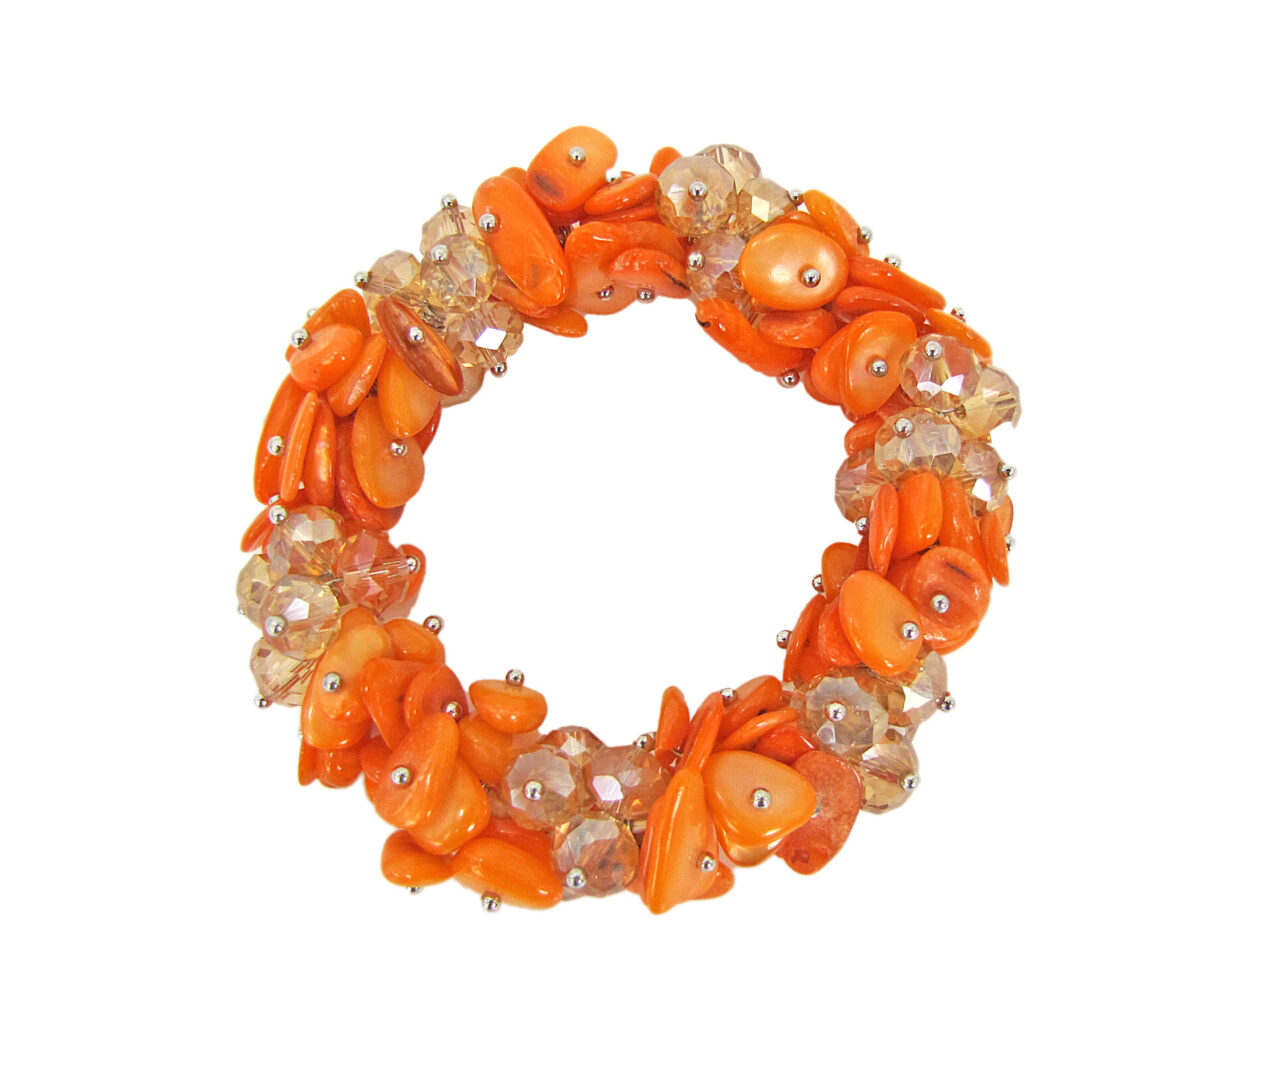 bracelet with orange beads and crystals in clusters